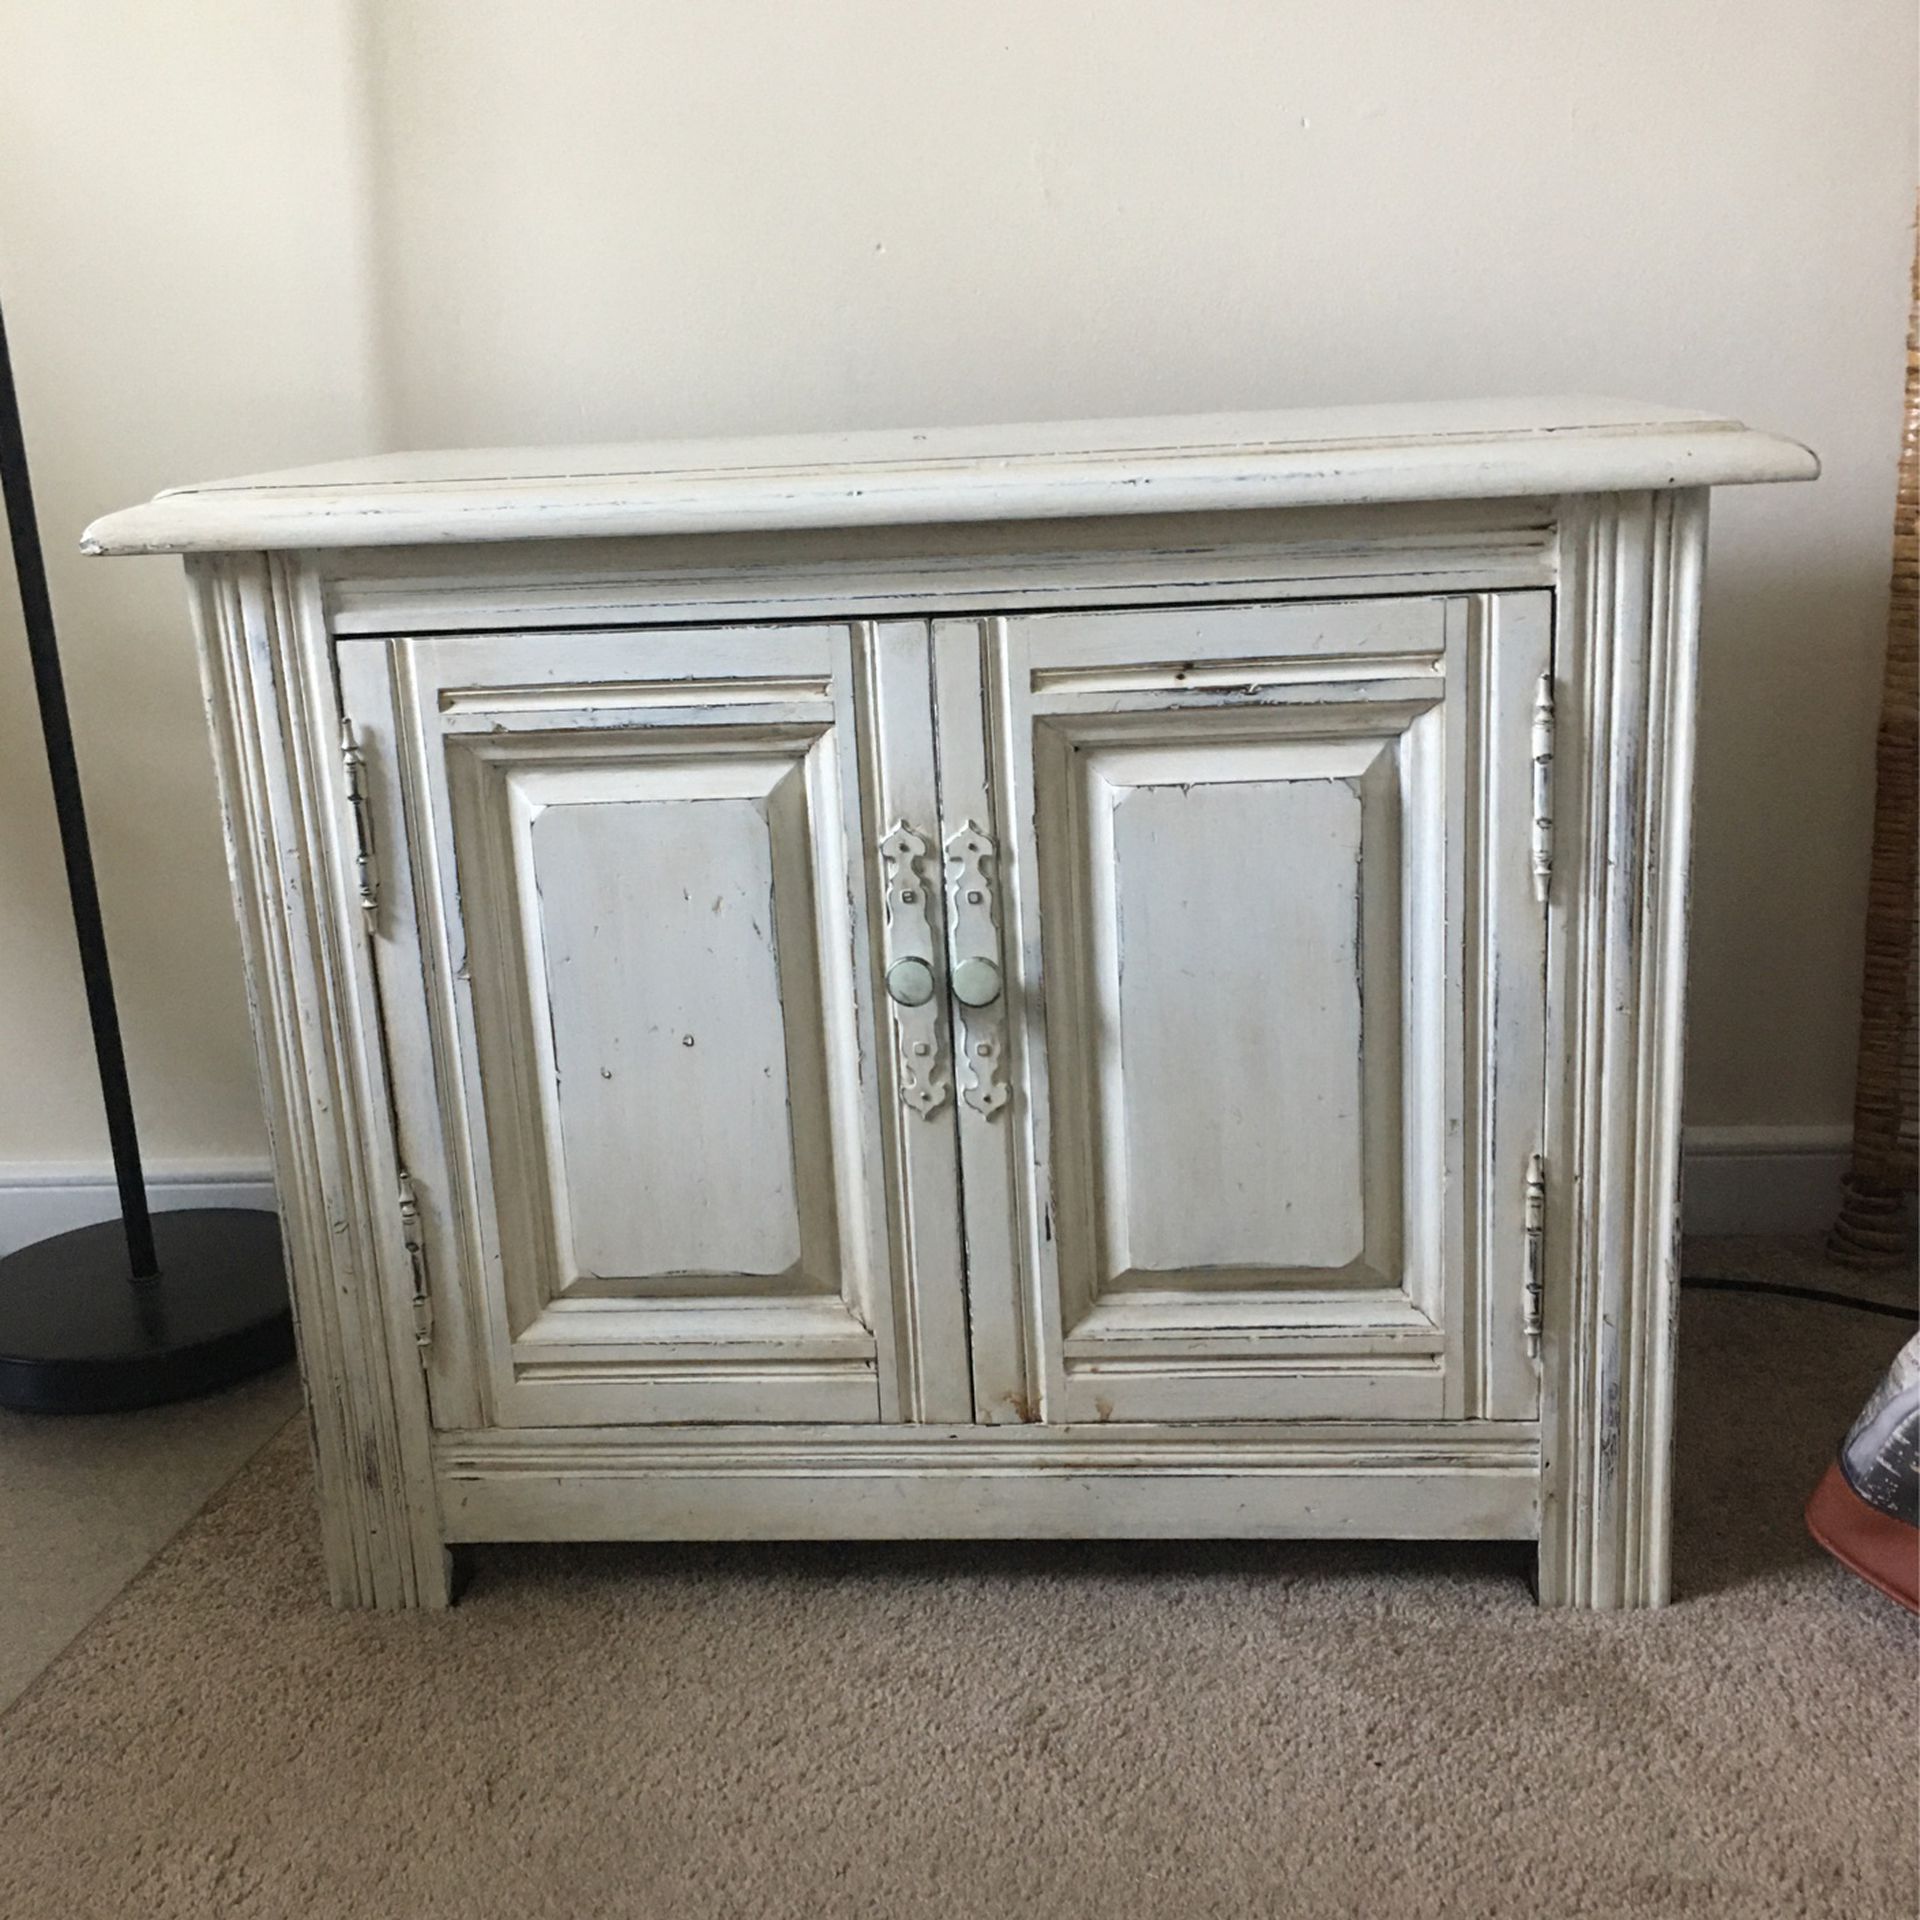 1970s vintage Thomasville nightstand or side table has been painted slightly distressed antiqued and sealed